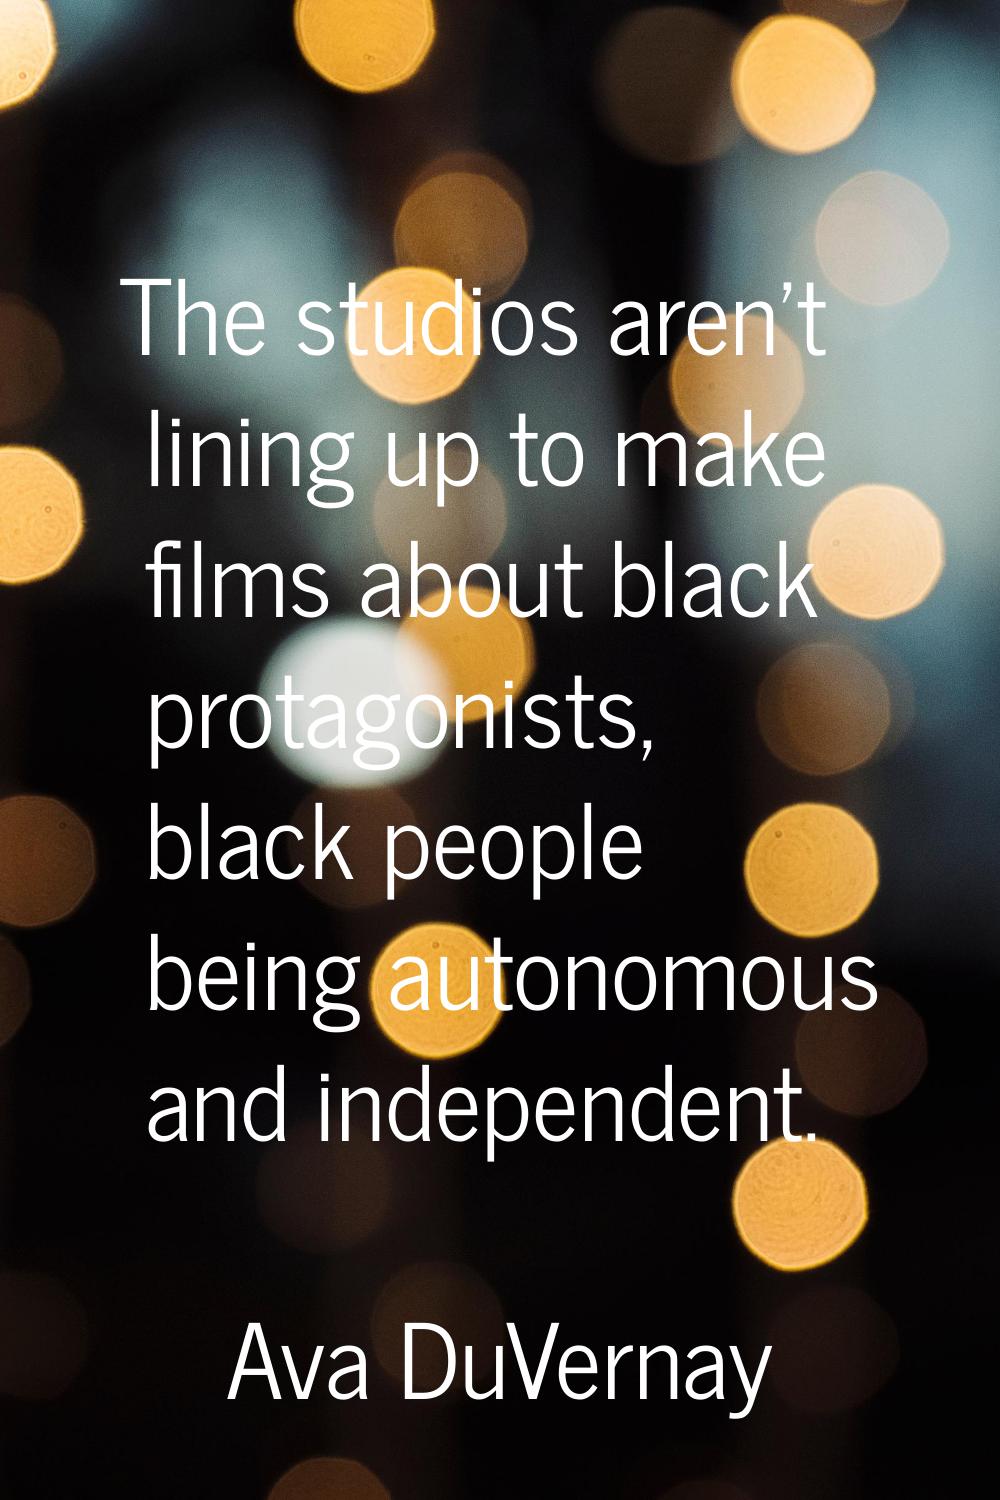 The studios aren't lining up to make films about black protagonists, black people being autonomous 